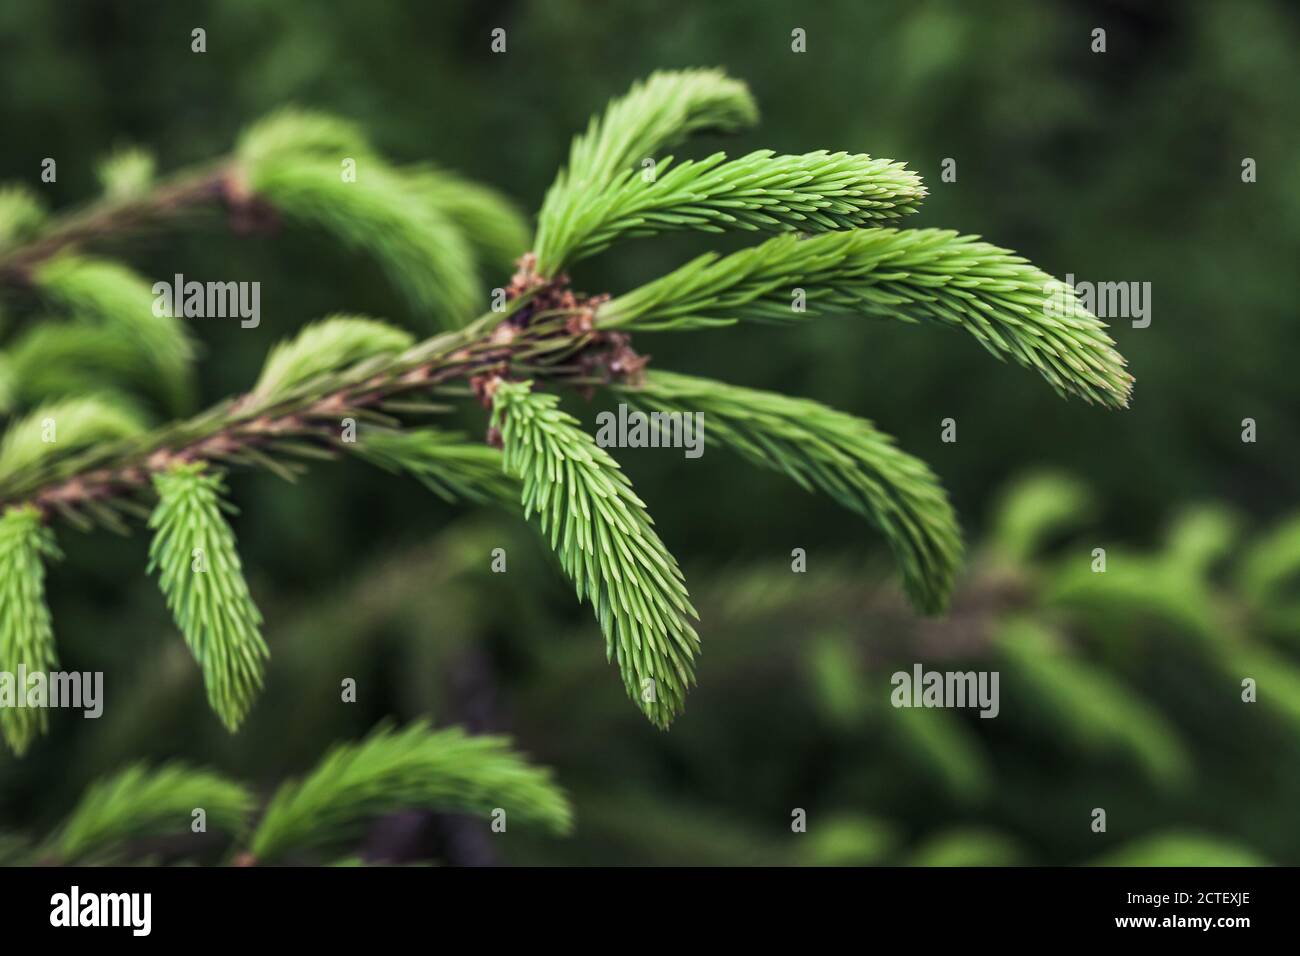 Fresh green spruce branch over blurred green forest background. Close up photo with selective focus Stock Photo